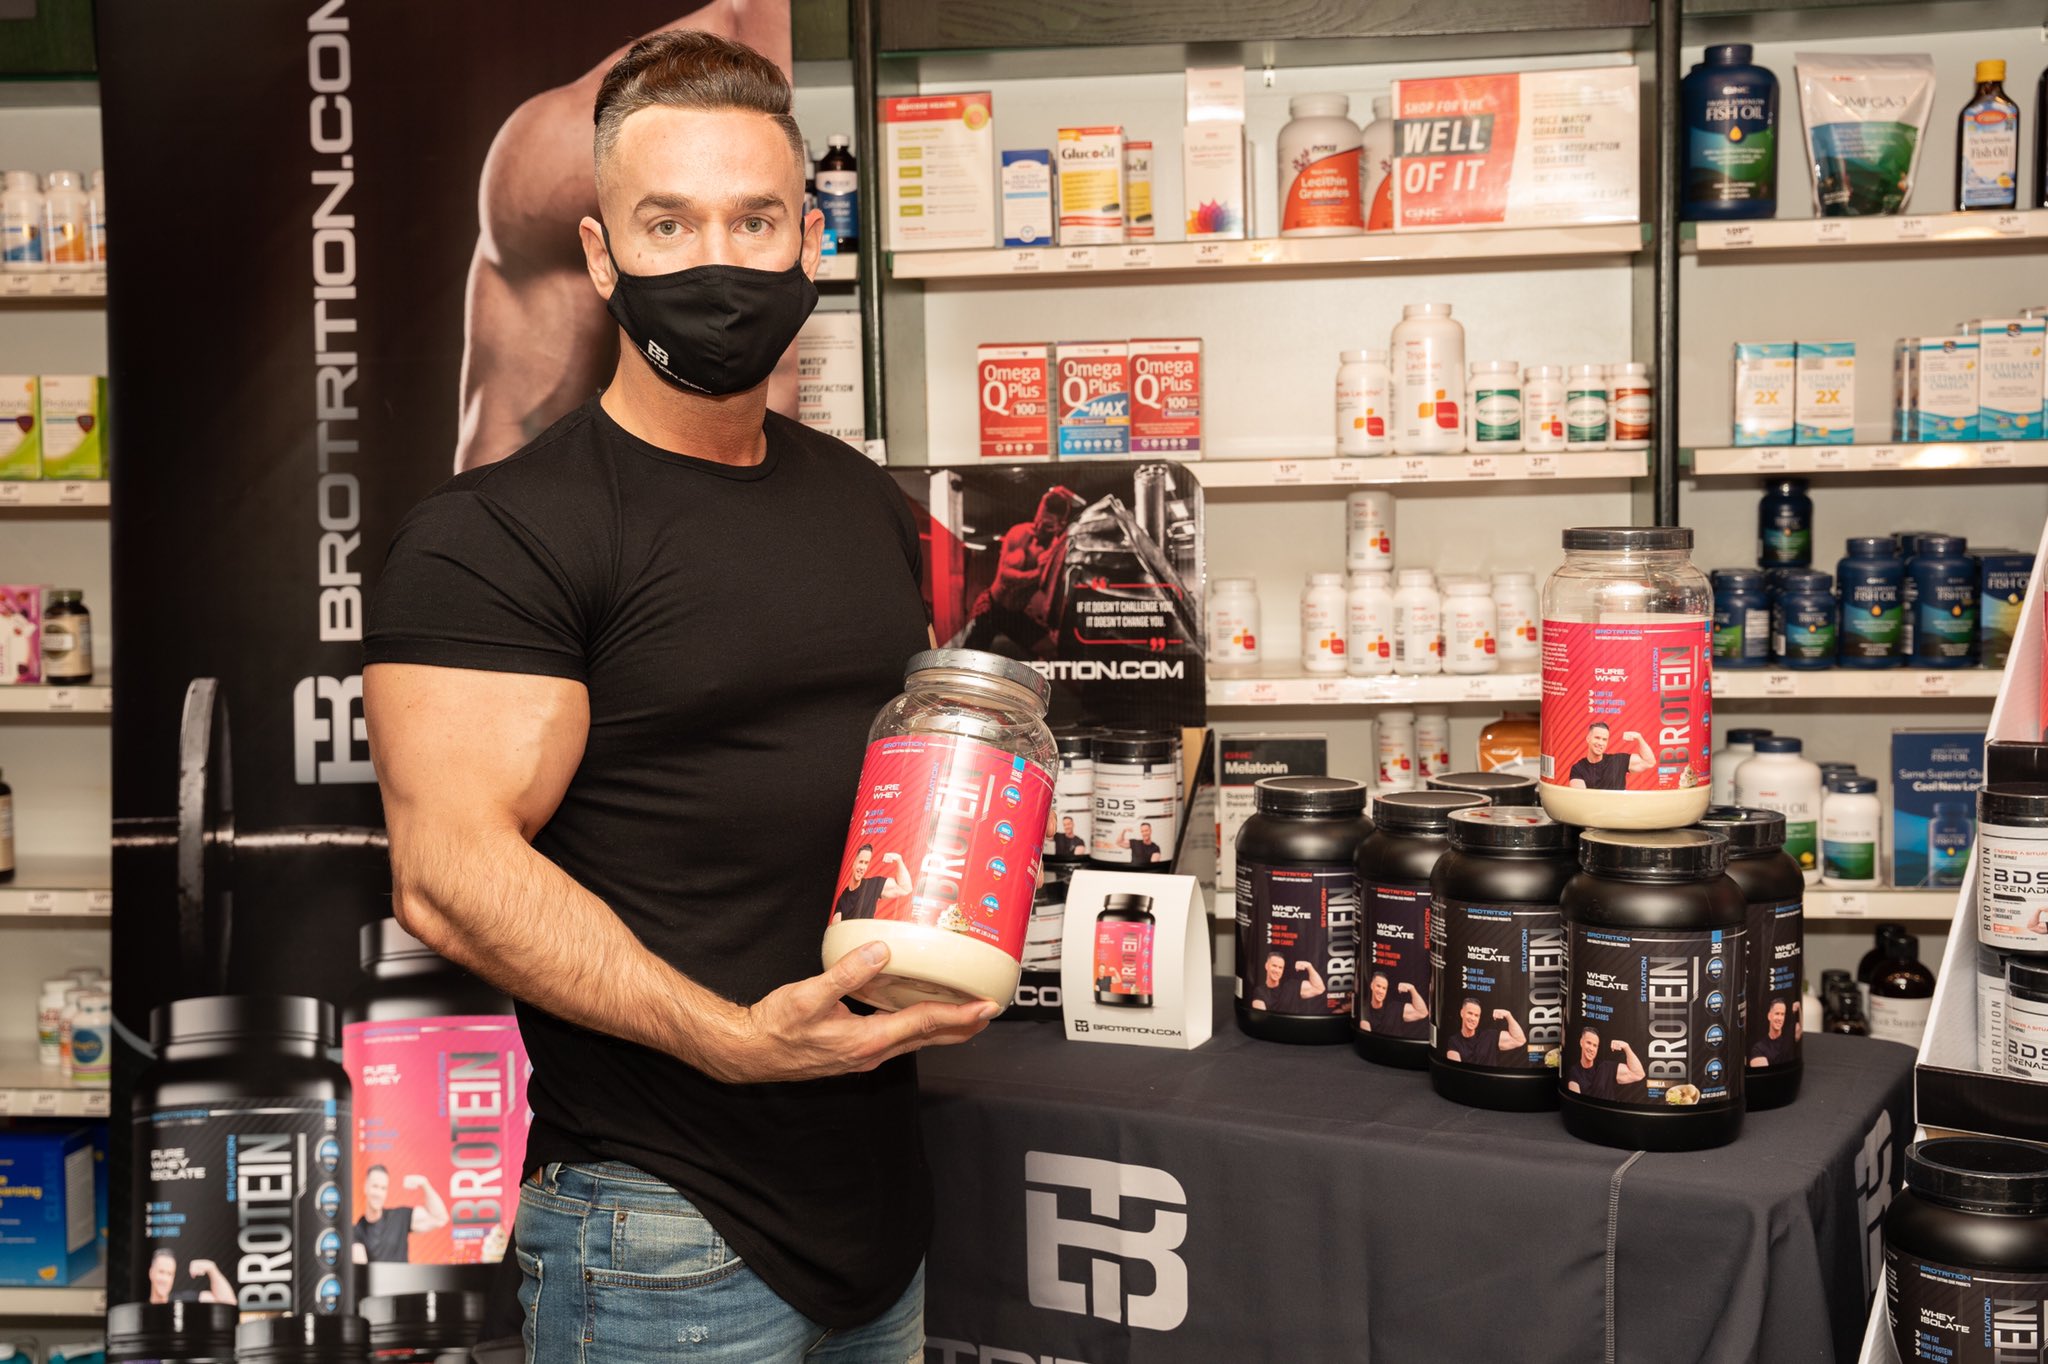 Mike 'The Situation' Sorrentino promotes his Brotrition line of workout supplements